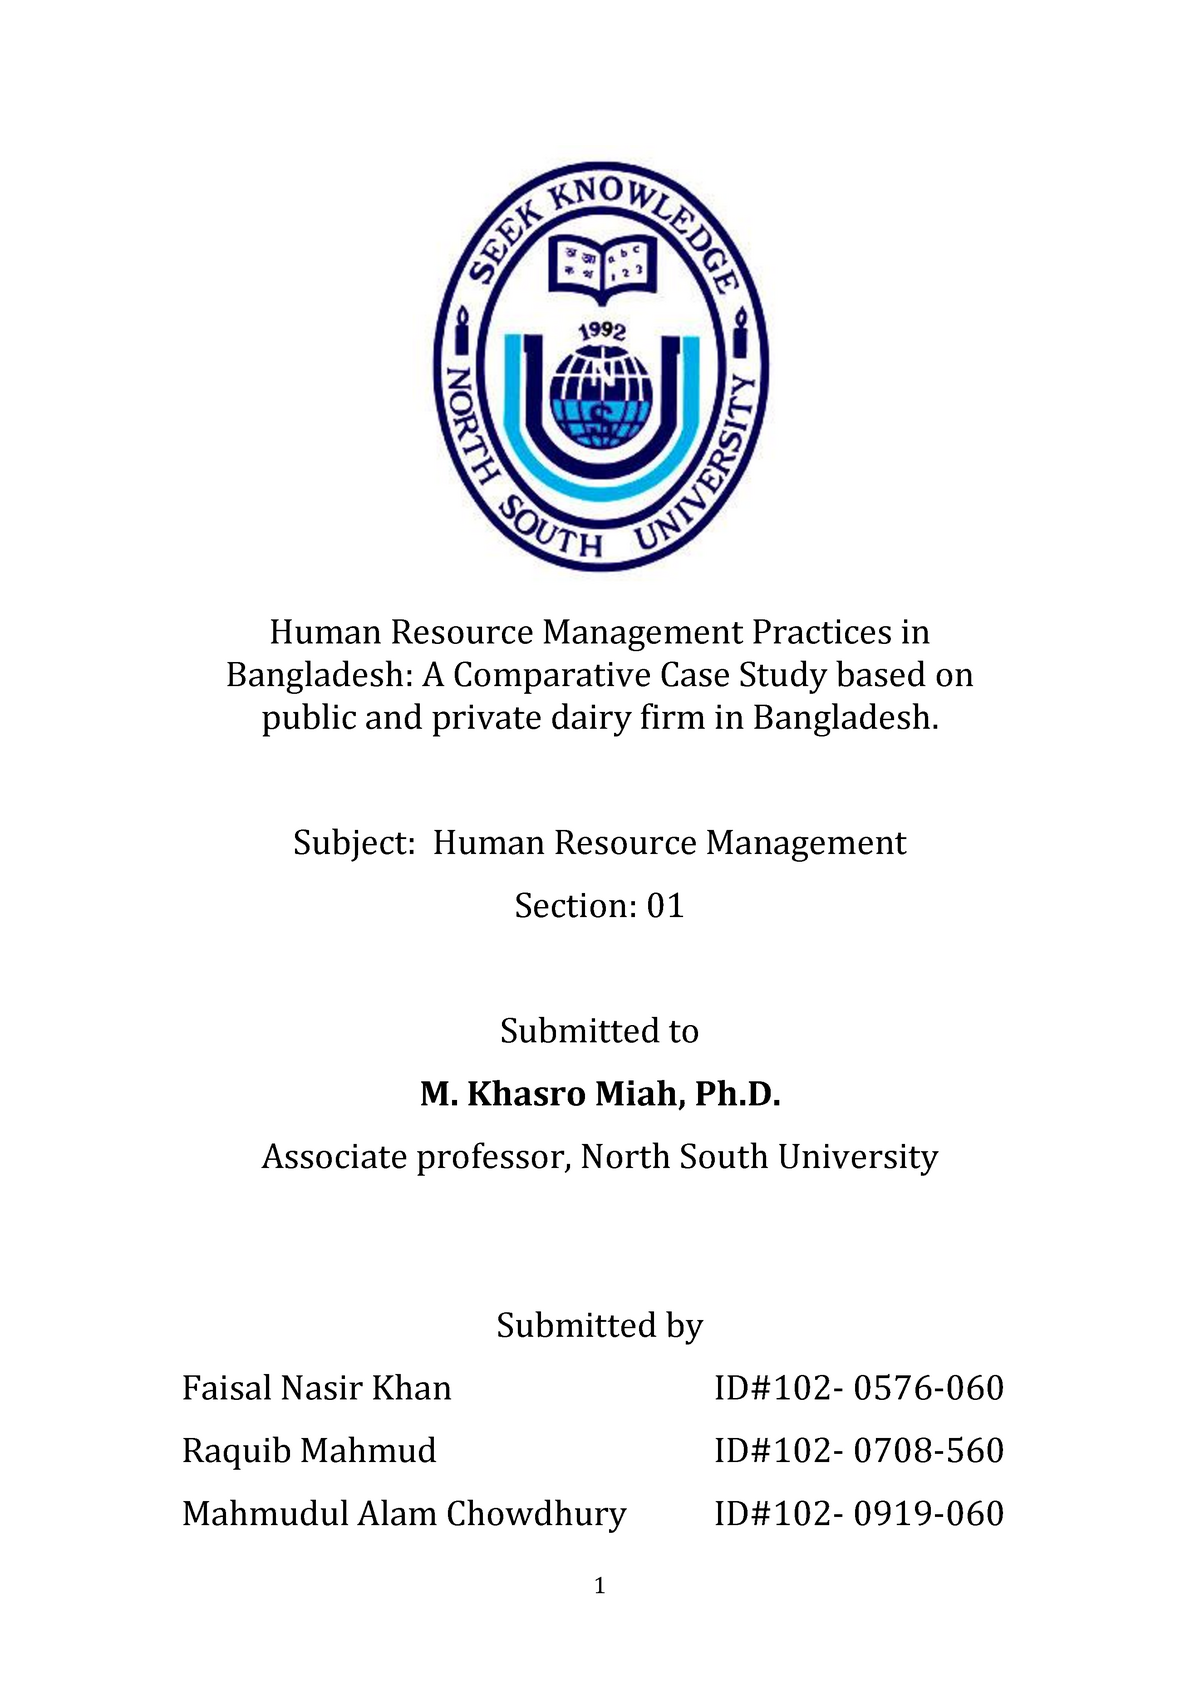 hrm practices in bangladesh assignment